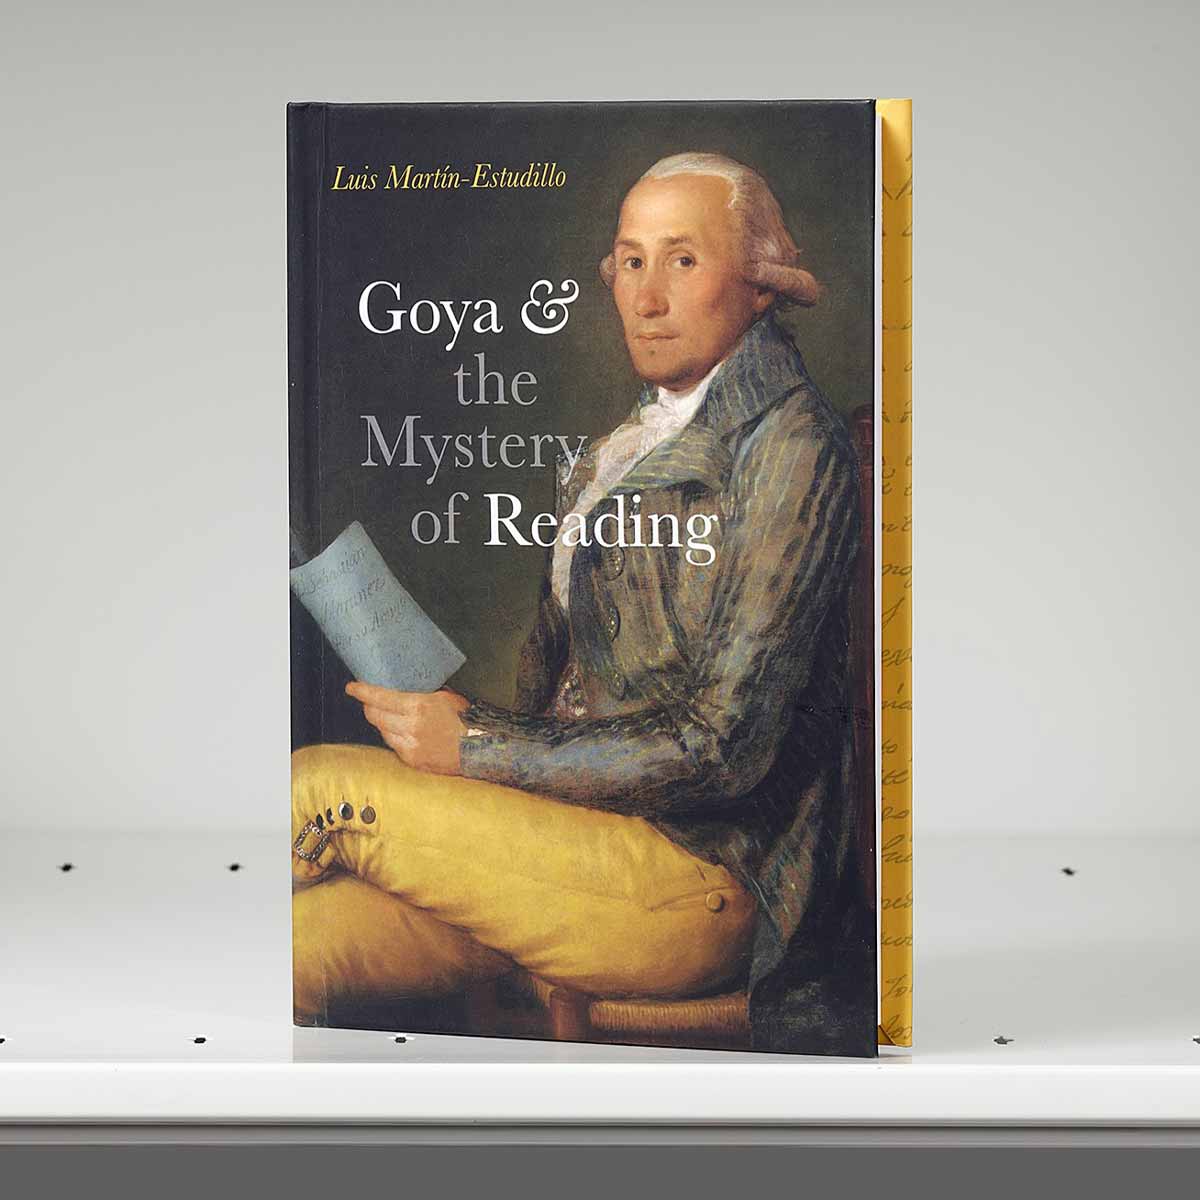 Book cover featuring an artwork of a man reading